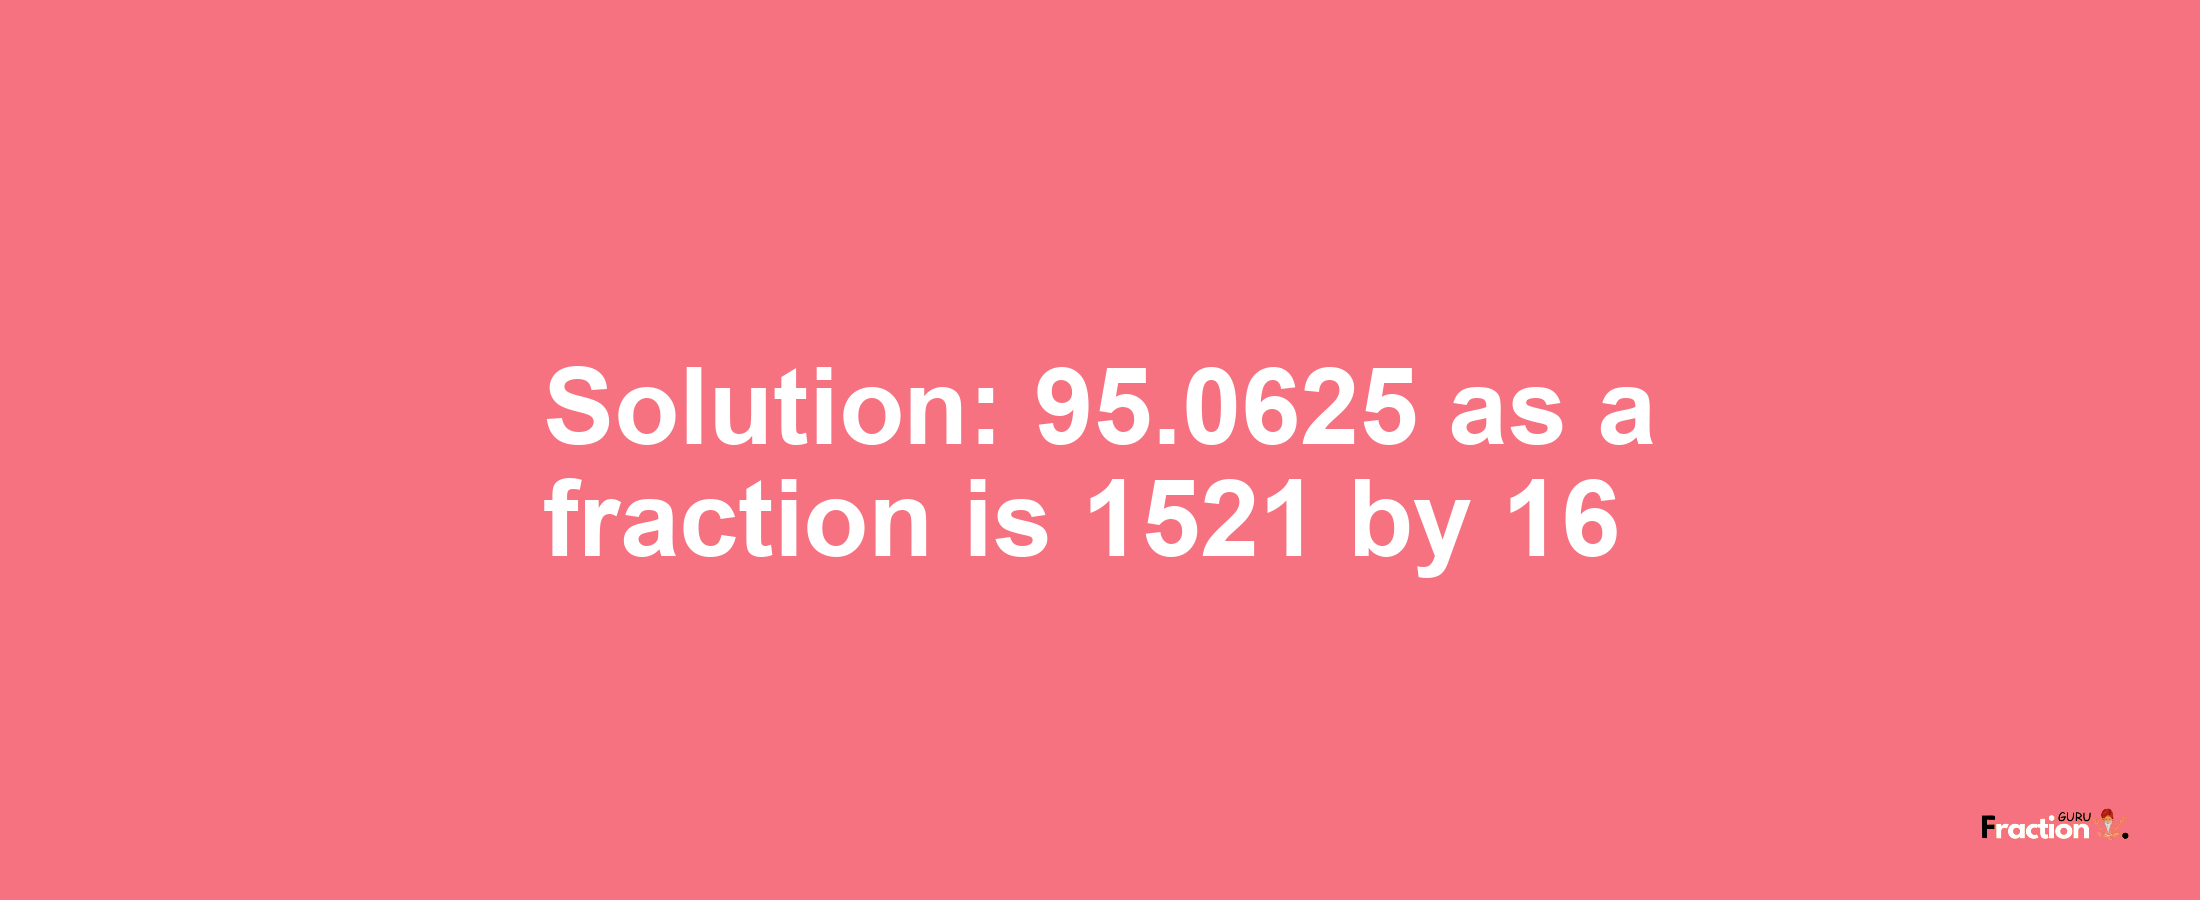 Solution:95.0625 as a fraction is 1521/16